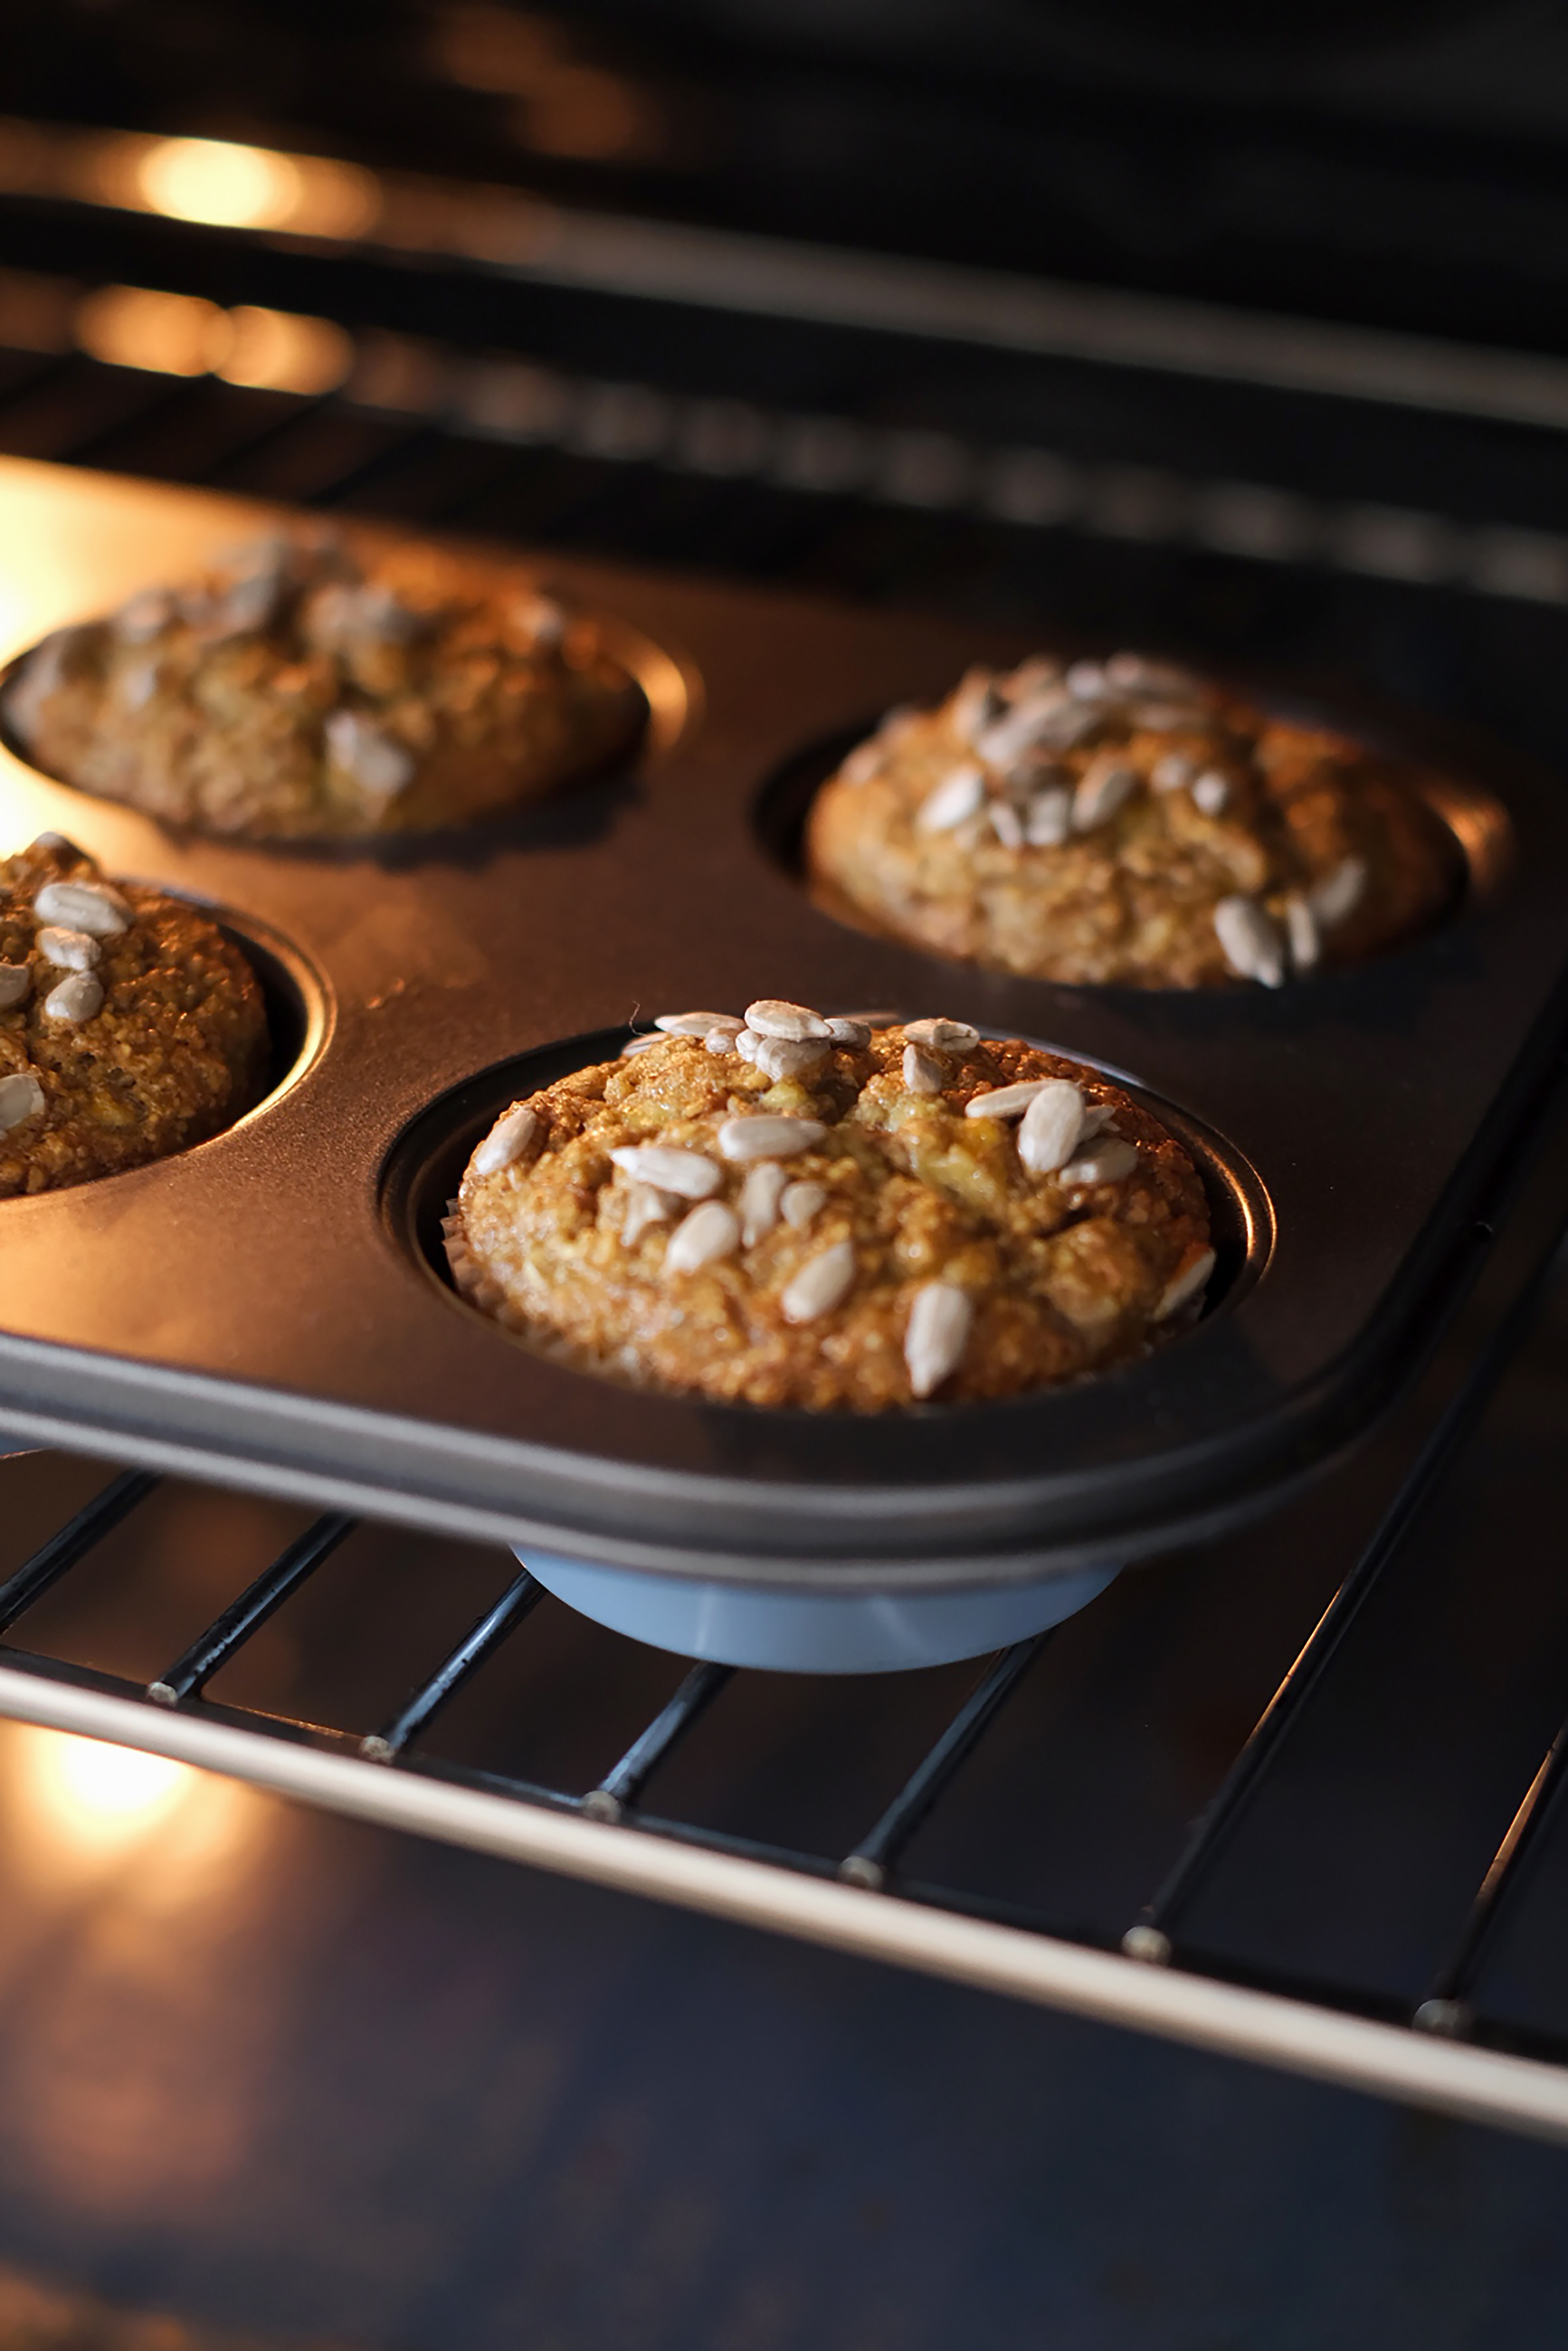 Muffins in an oven. | Source: Unsplash